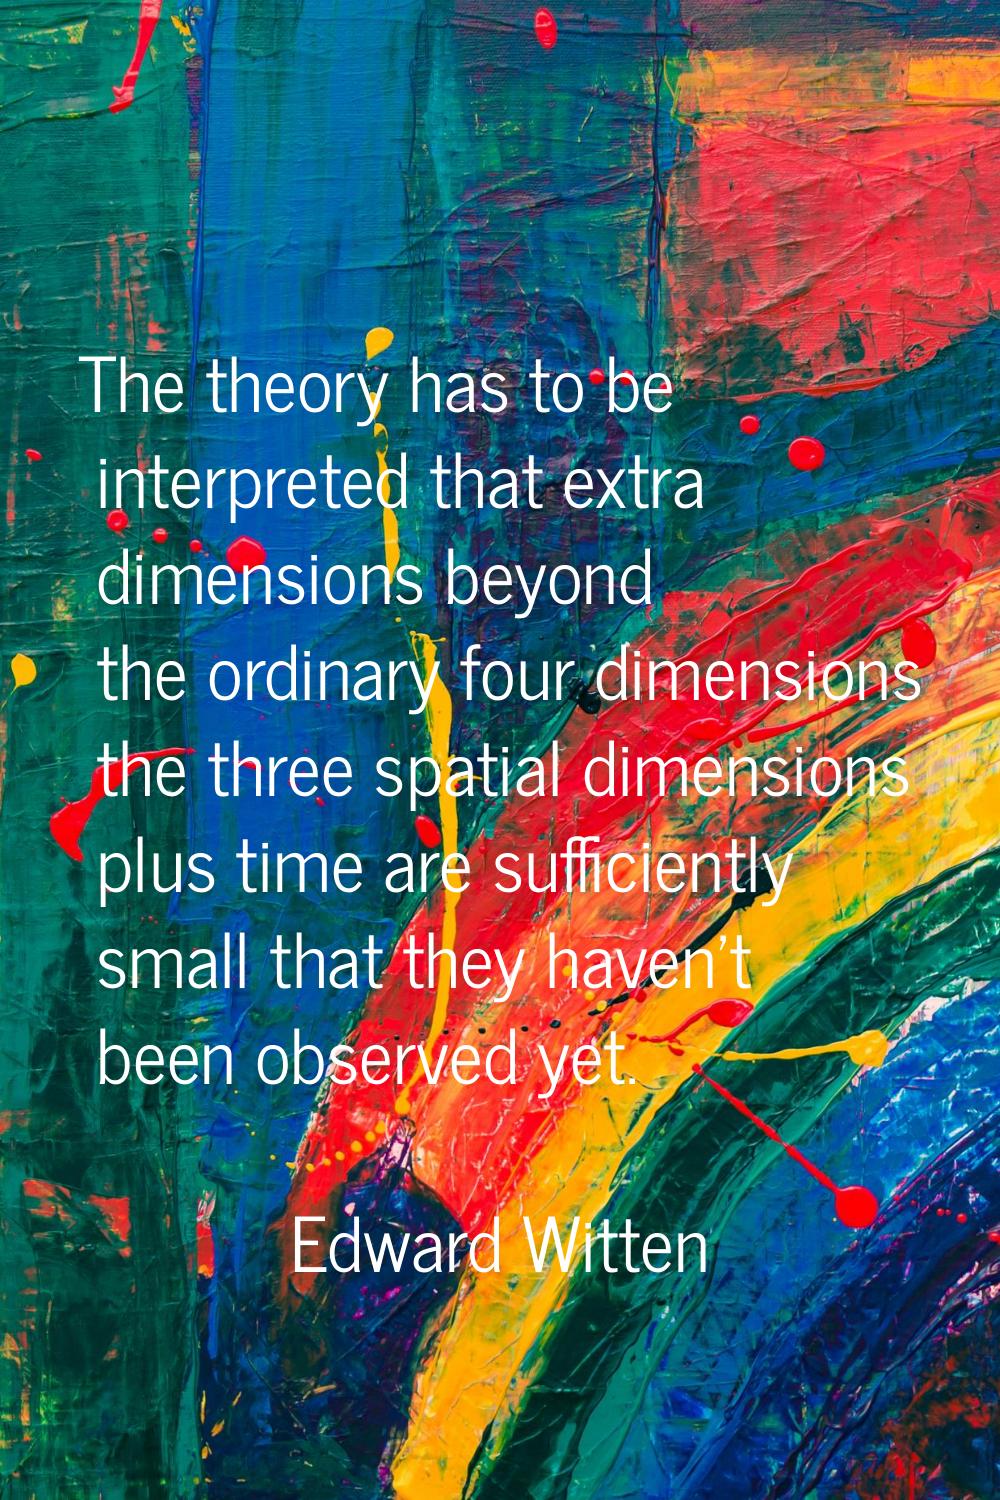 The theory has to be interpreted that extra dimensions beyond the ordinary four dimensions the thre